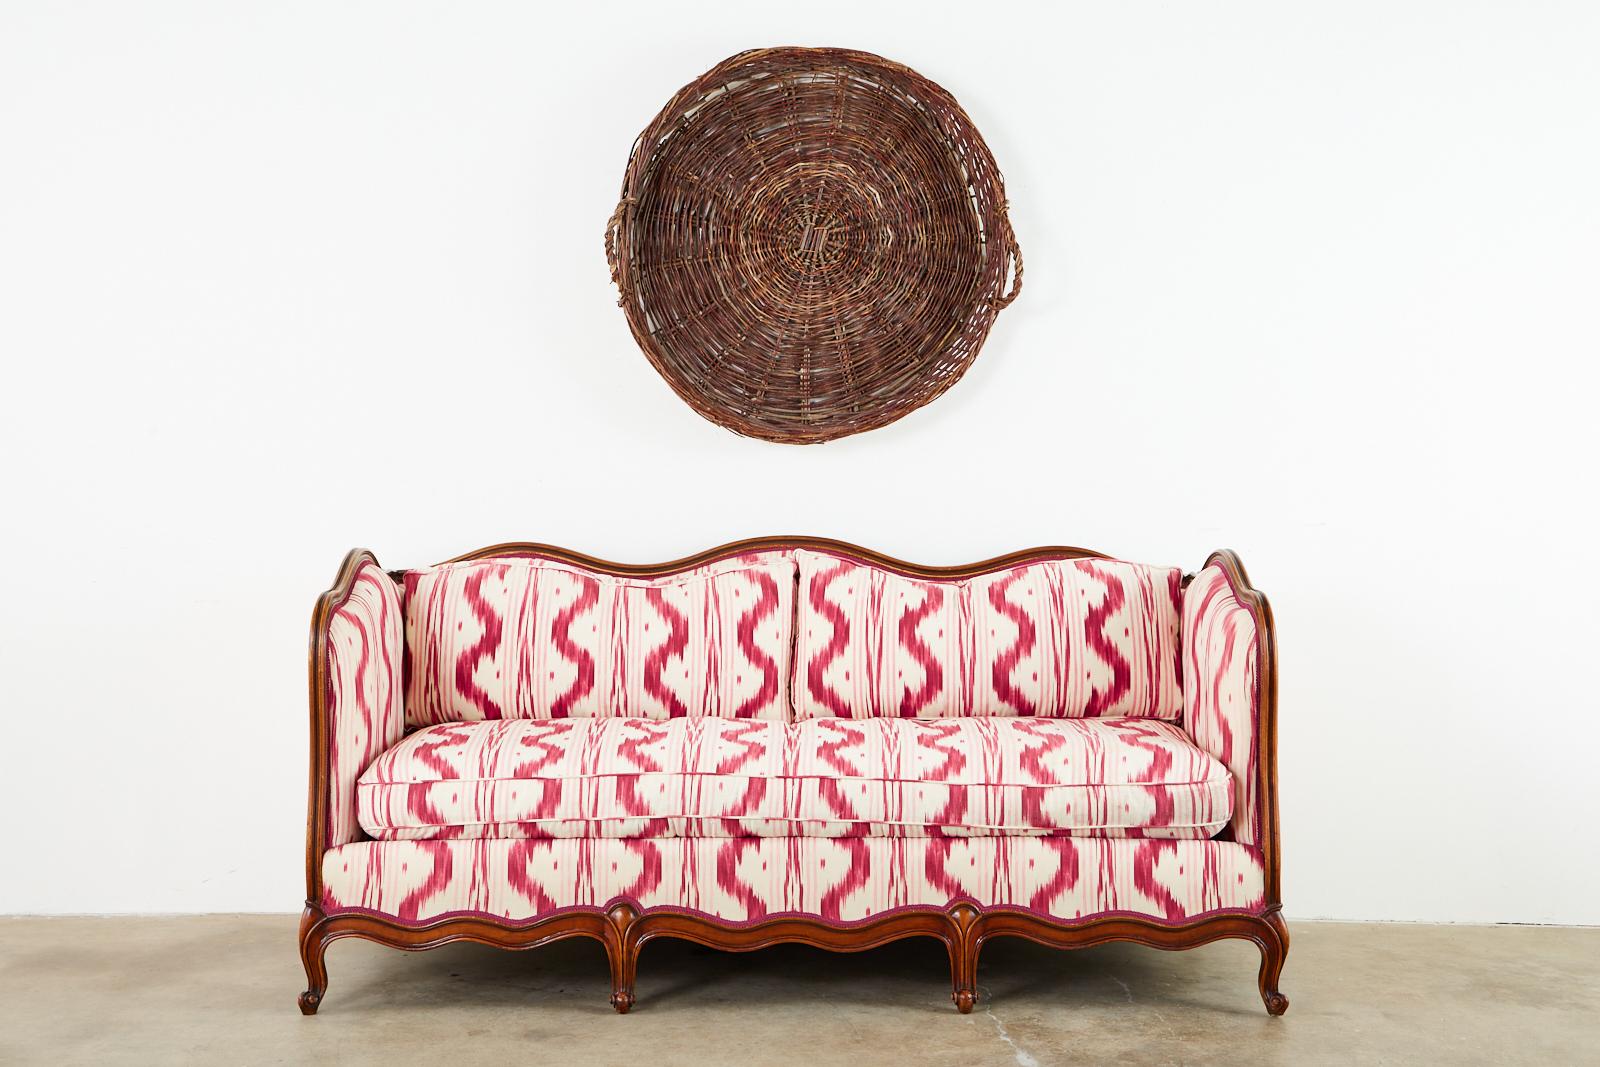 Stunning French Provincial style canape or settee featuring a modern redux with Pierre Frey Toile de Nantes Ikat upholstery. The dramatic hand carved frame has a serpentine back, arms, and apron supported by Louis XV style cabriole legs. The